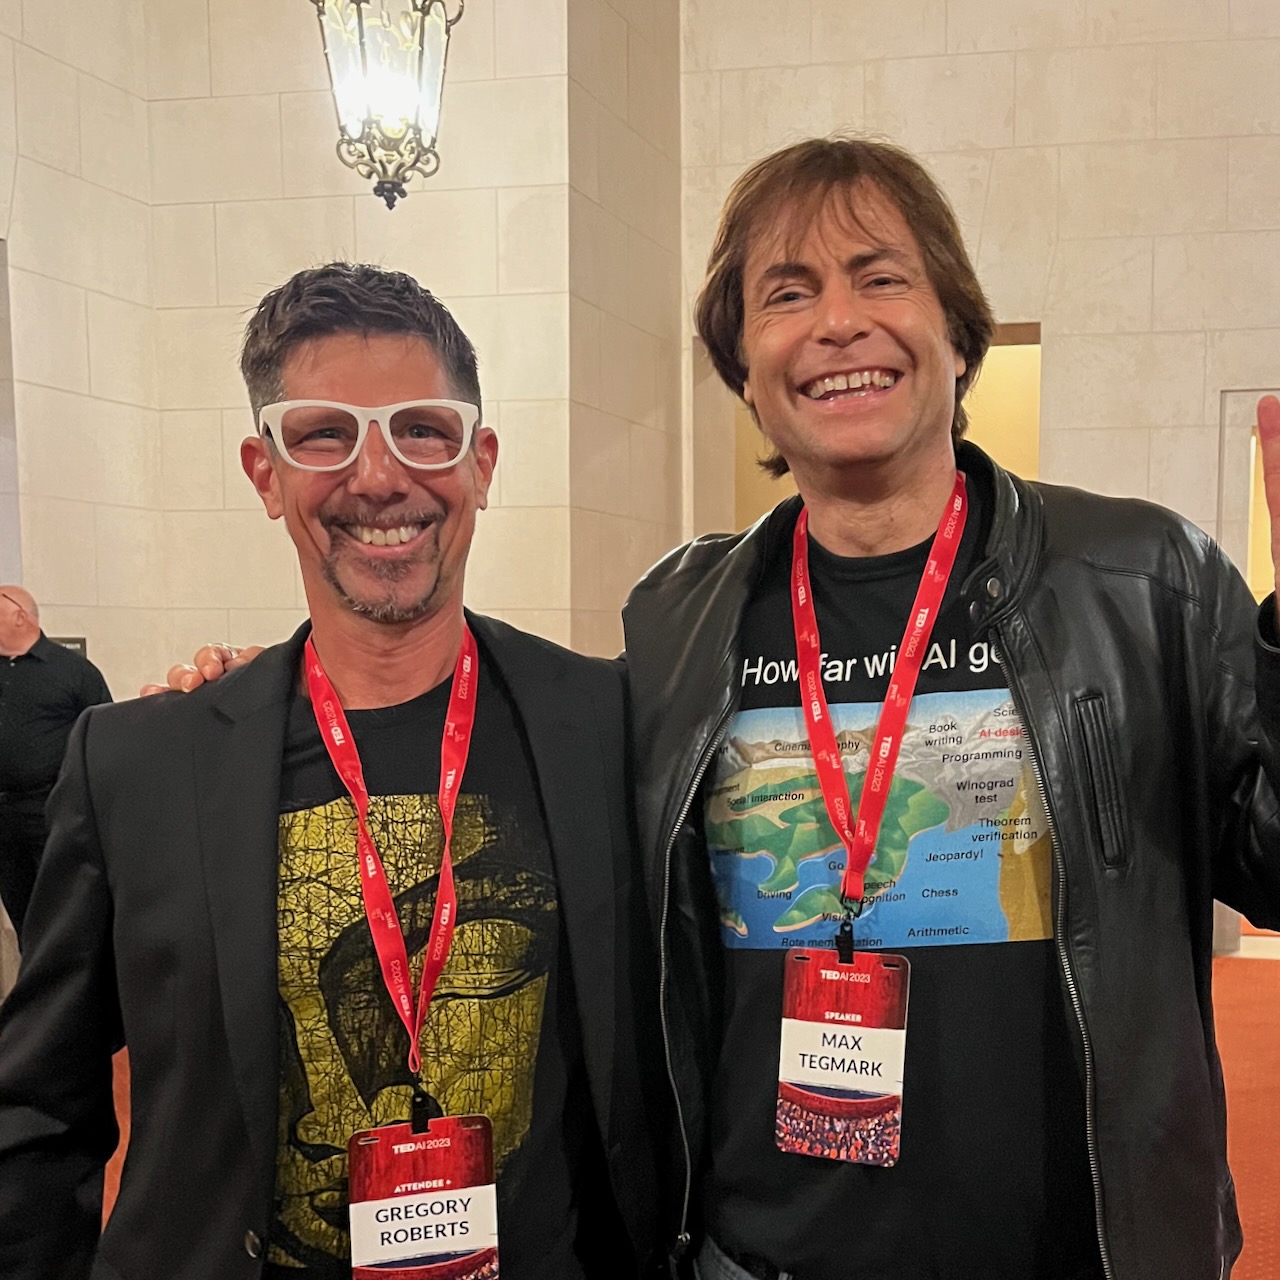 Max Tegmark FLI MIT and Gregory Roberts dSky TED-AI 2023